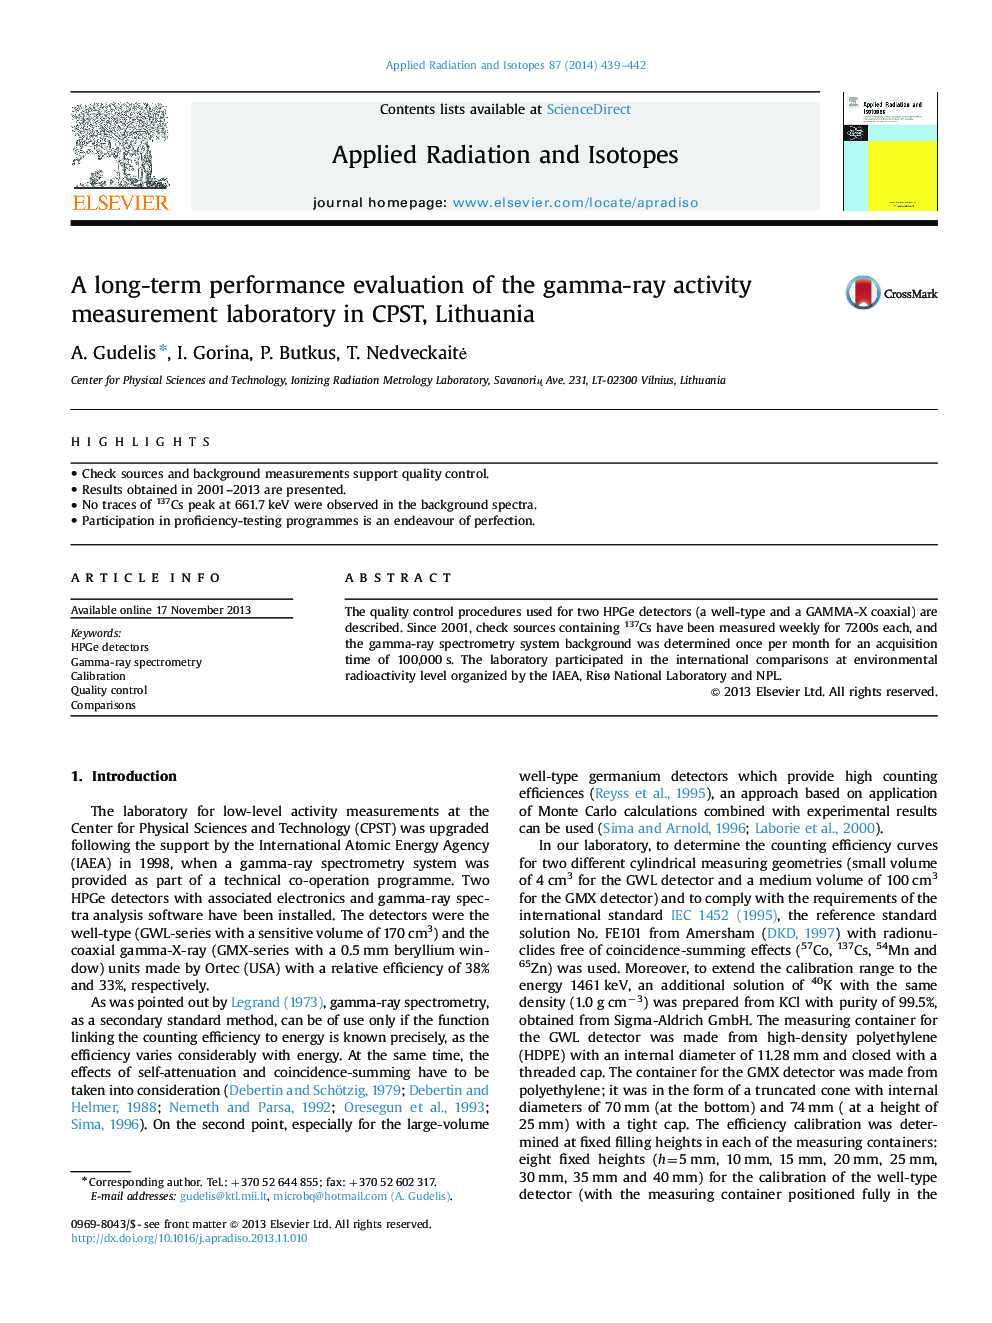 A long-term performance evaluation of the gamma-ray activity measurement laboratory in CPST, Lithuania